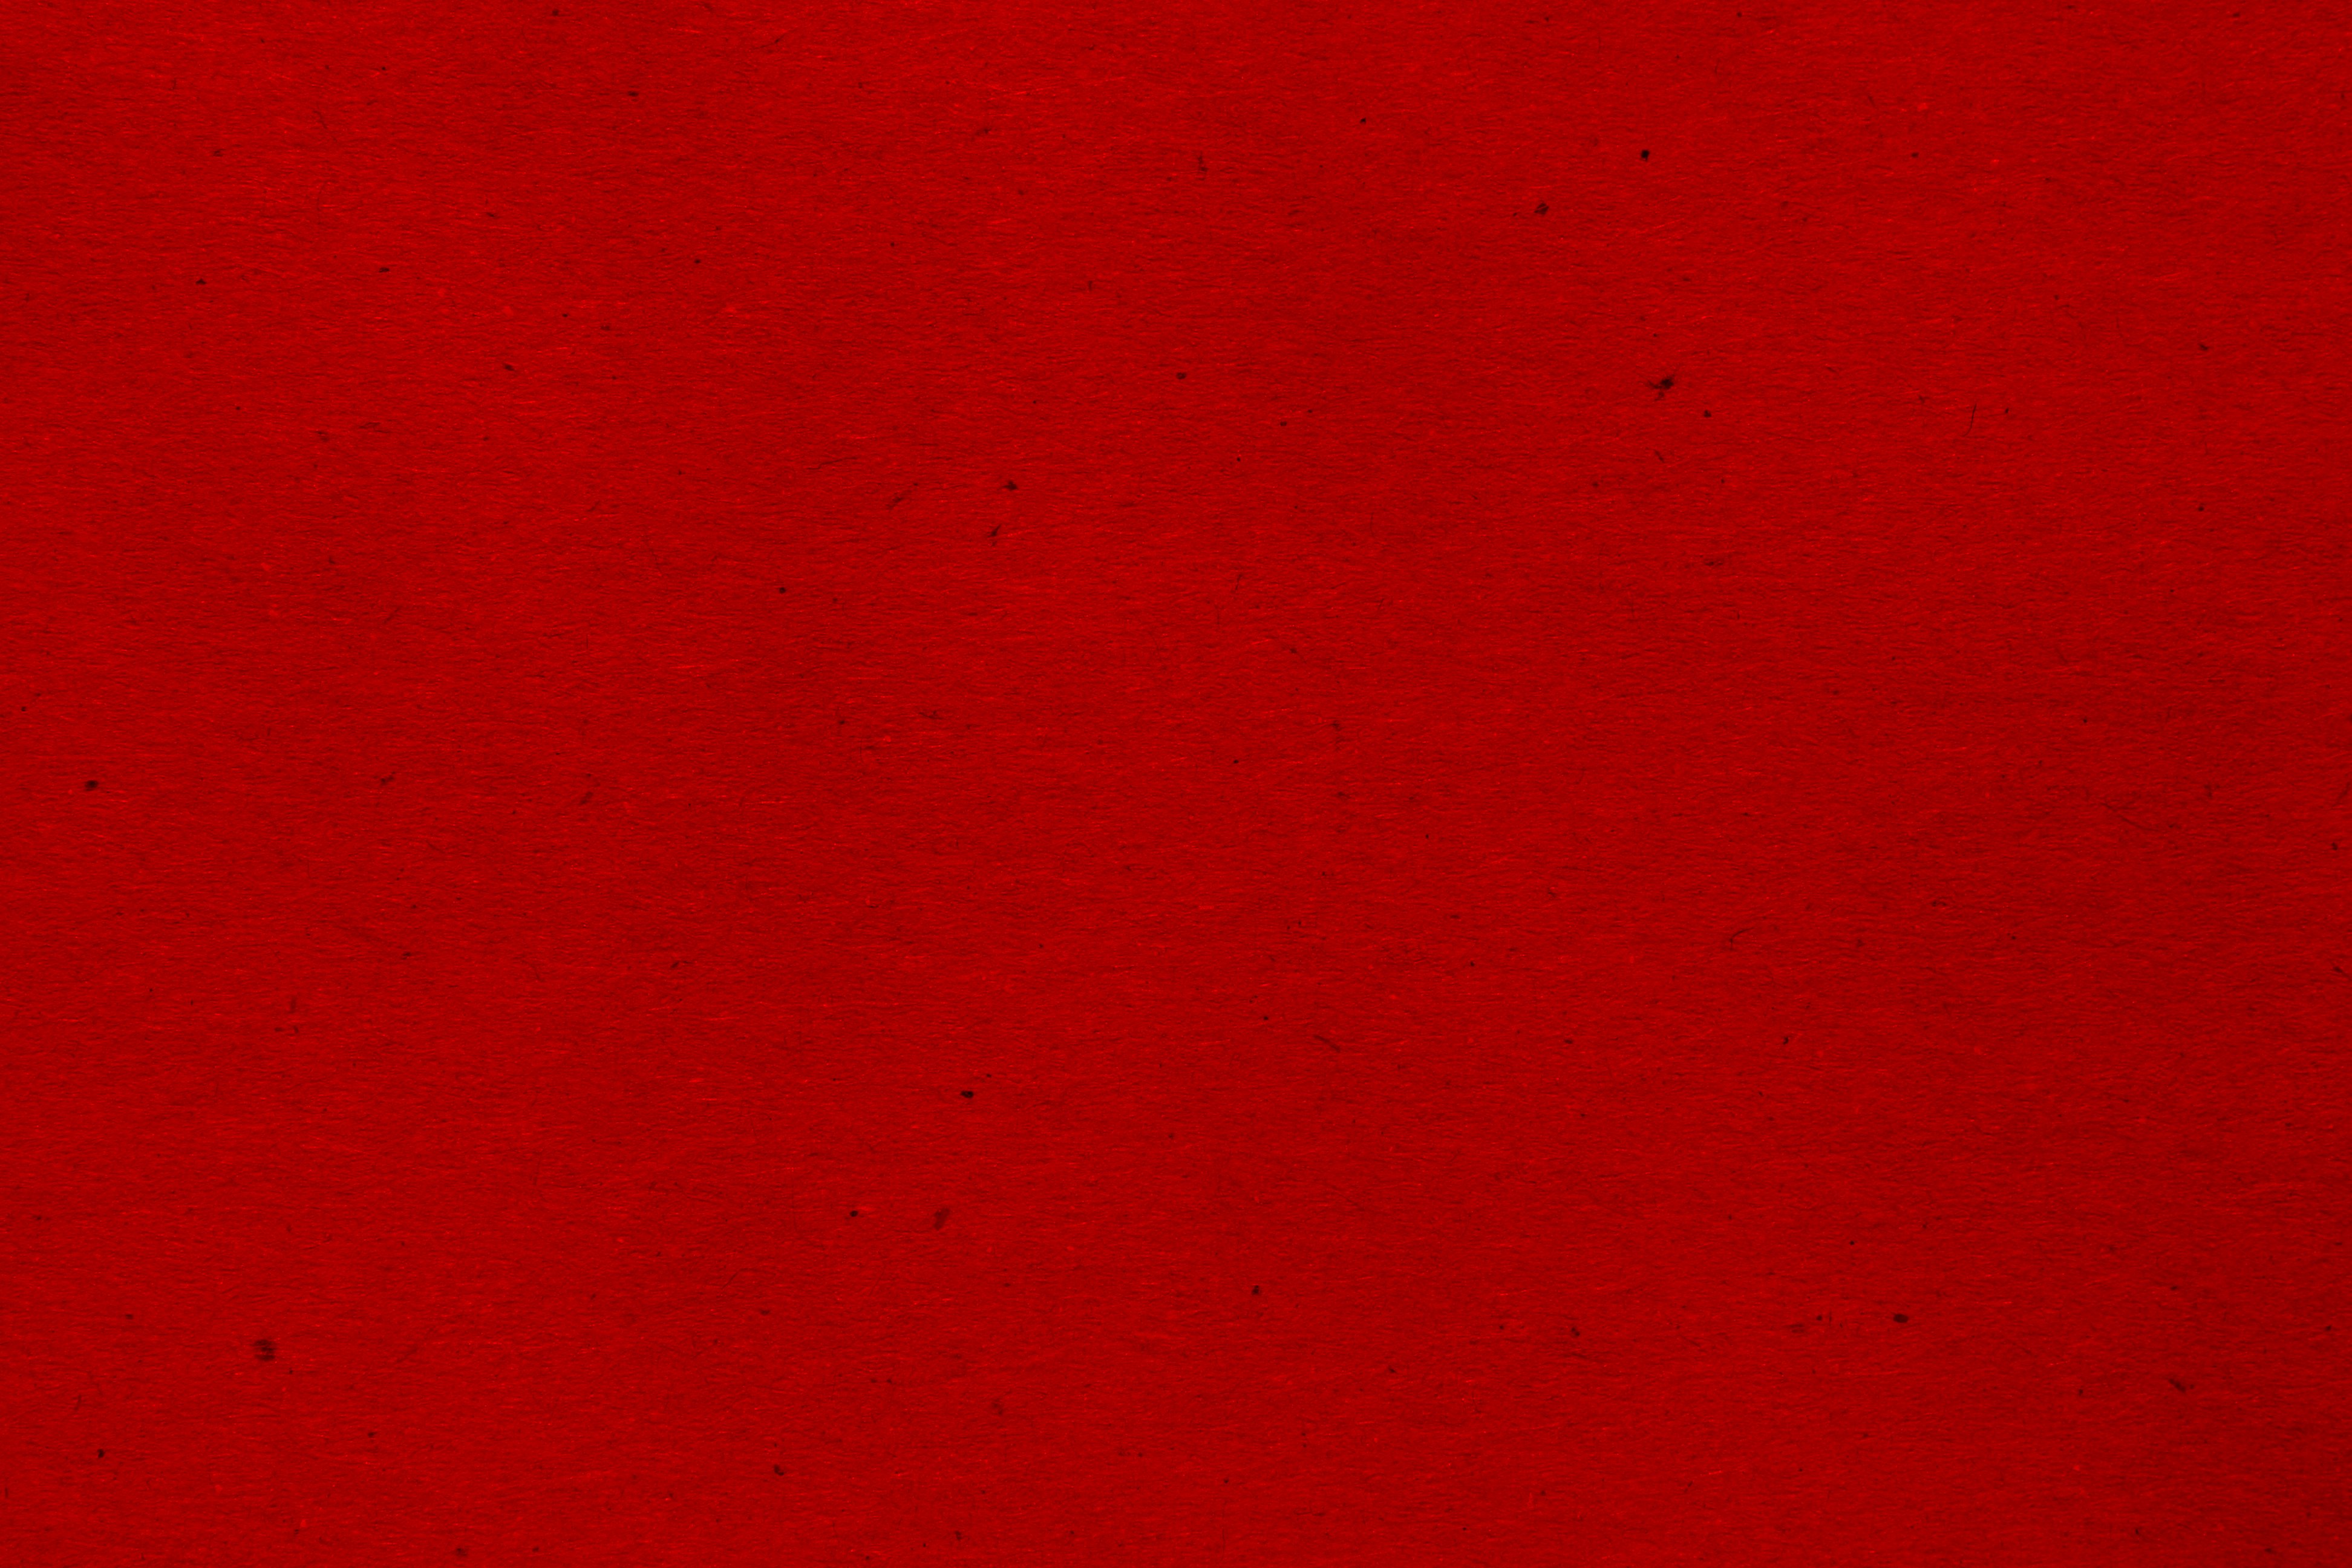 Deep Red Paper Texture With Flecks Picture Free Photograph Photos Public Domain